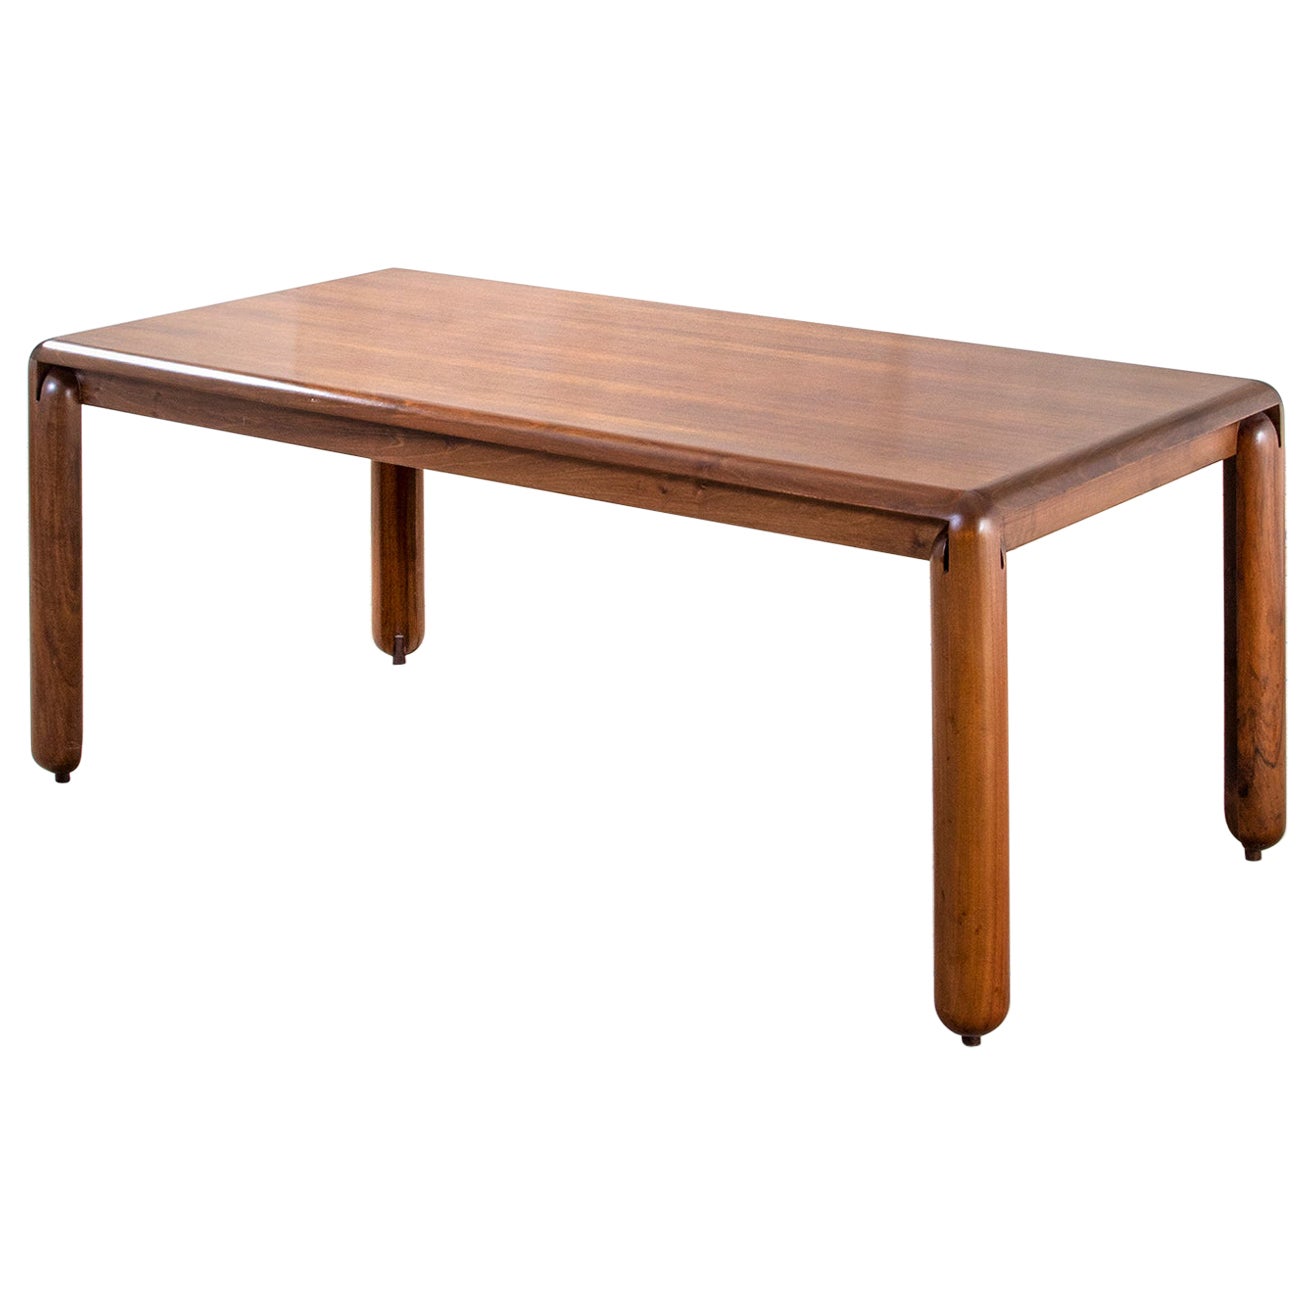 20th Century Vico Magistretti Table Mod. 781 for Cassina in Wood '60s For Sale